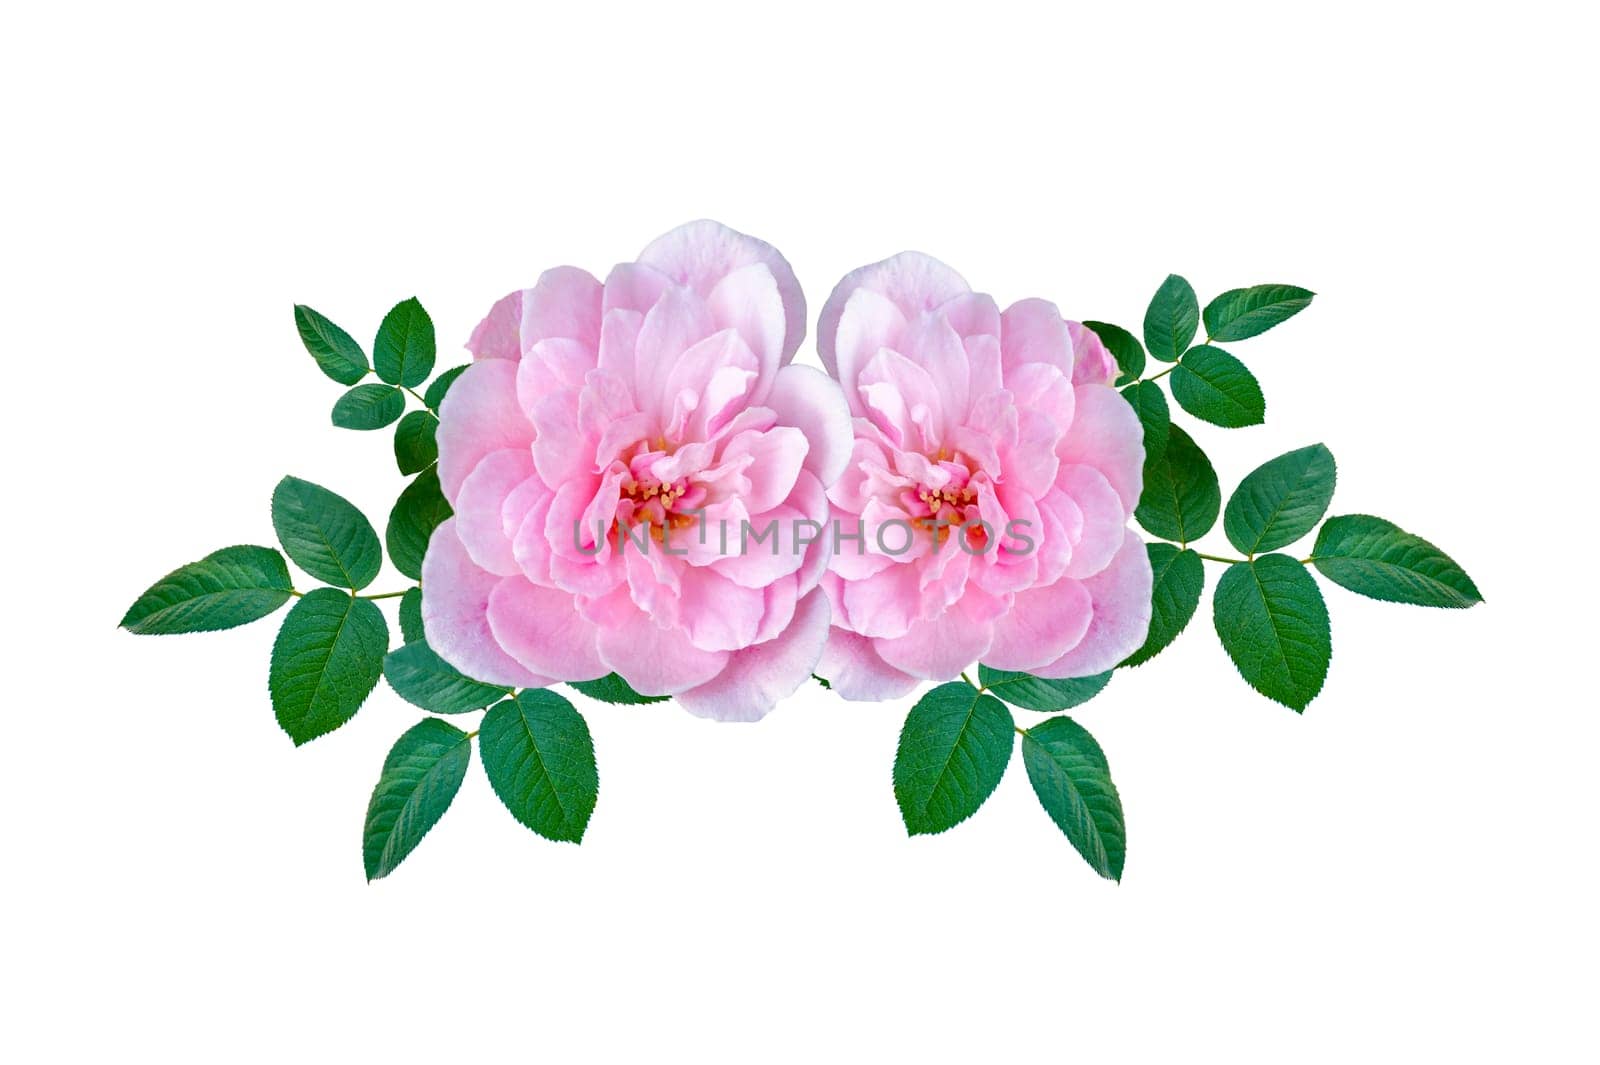 Bouquet of pink roses on white background. Isolate